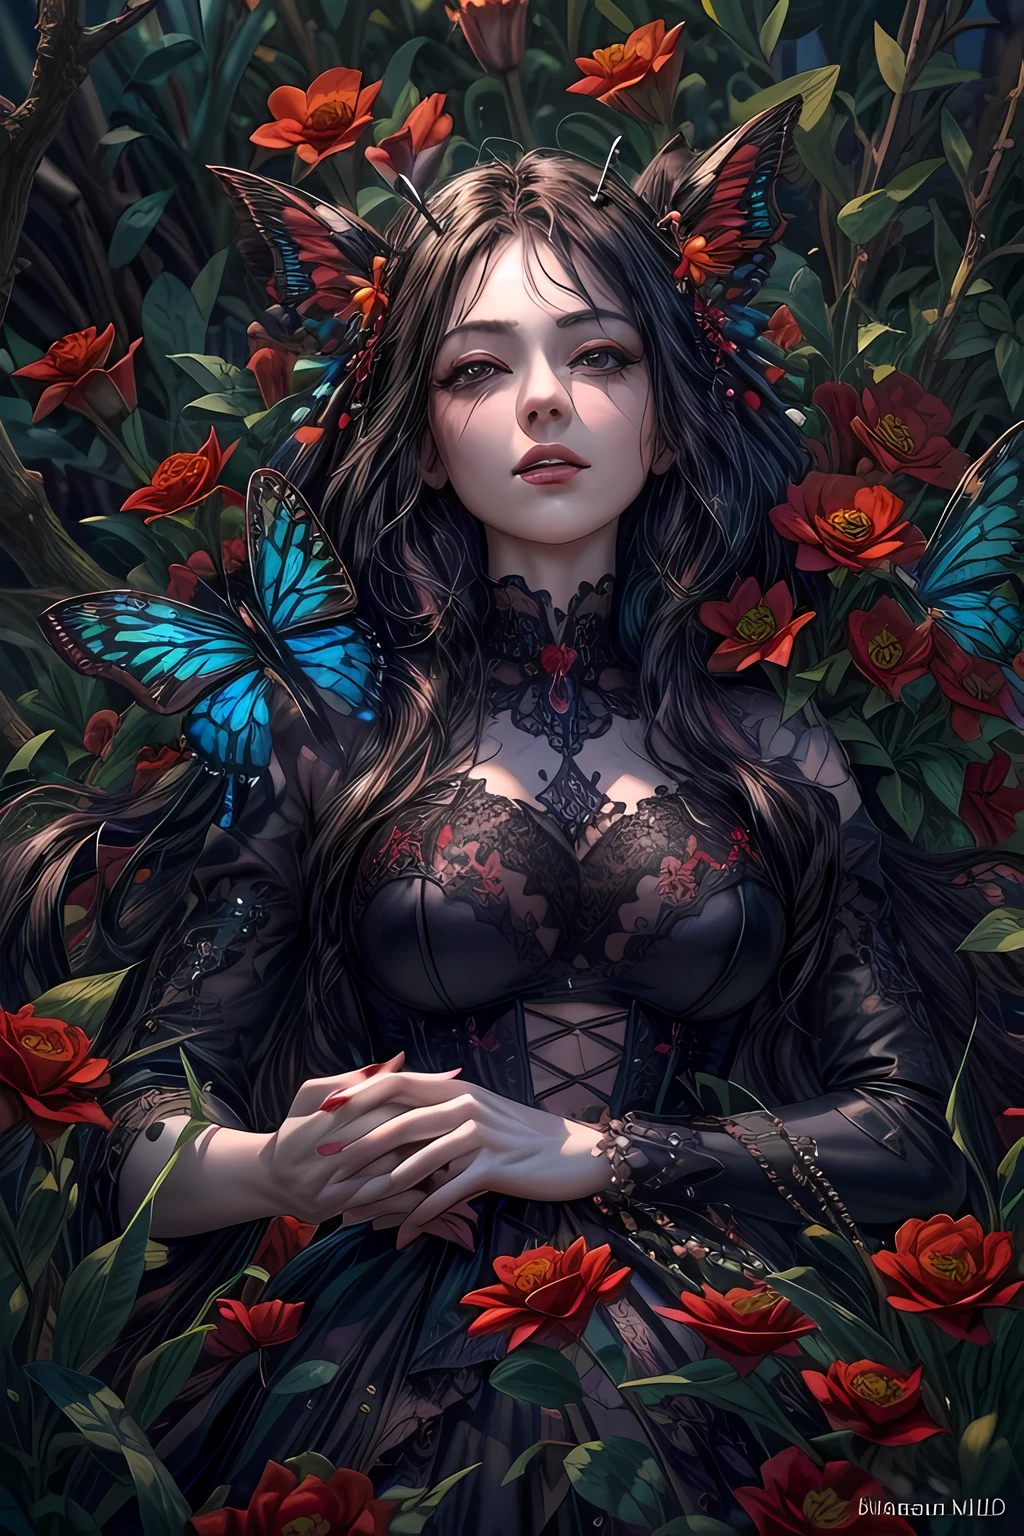 high details, best quality, 16k, RAW, [best detailed], masterpiece, best quality, (extremely detailed), full body, ultra wide shot, photorealistic, dark fantasy art, goth art, RPG art, D&D art, a picture of a dark female fairy resting in a flower meadow, extremely beautiful fairy, ultra feminine (intense details, Masterpiece, best quality), best detailed face (intense details, Masterpiece, best quality), having wide butterfly wings, spread butterfly wings (intense details, Masterpiece, best quality), dark colors wings (intense details, Masterpiece, best quality), black hair, long hair, shinning hair, flowing hair, shy smile, innocent smile, blue eyes, dark red lips, wearing [red] dress latex corset (intense details, Masterpiece, best quality), dynamic elegant shirt, chocker, wearing high heels, in dark colored flower meadow (intense details, Masterpiece, best quality), (red flowers: 1.2) , (black flowers: 1.2), (white flowers: 1.2), (blue flowers: 1.3) [extreme many flowers] (intense details, Masterpiece, best quality), dark colorful flowers (intense details, Masterpiece, best quality), flower meadow in a dark goth field background, dim light, cinematic light, High Detail, Ultra High Quality, High Resolution, 16K Resolution, Ultra HD Pictures, 3D rendering Ultra Realistic, Clear Details, Realistic Detail, Ultra High Definition, DonMF41ryW1ng5XL